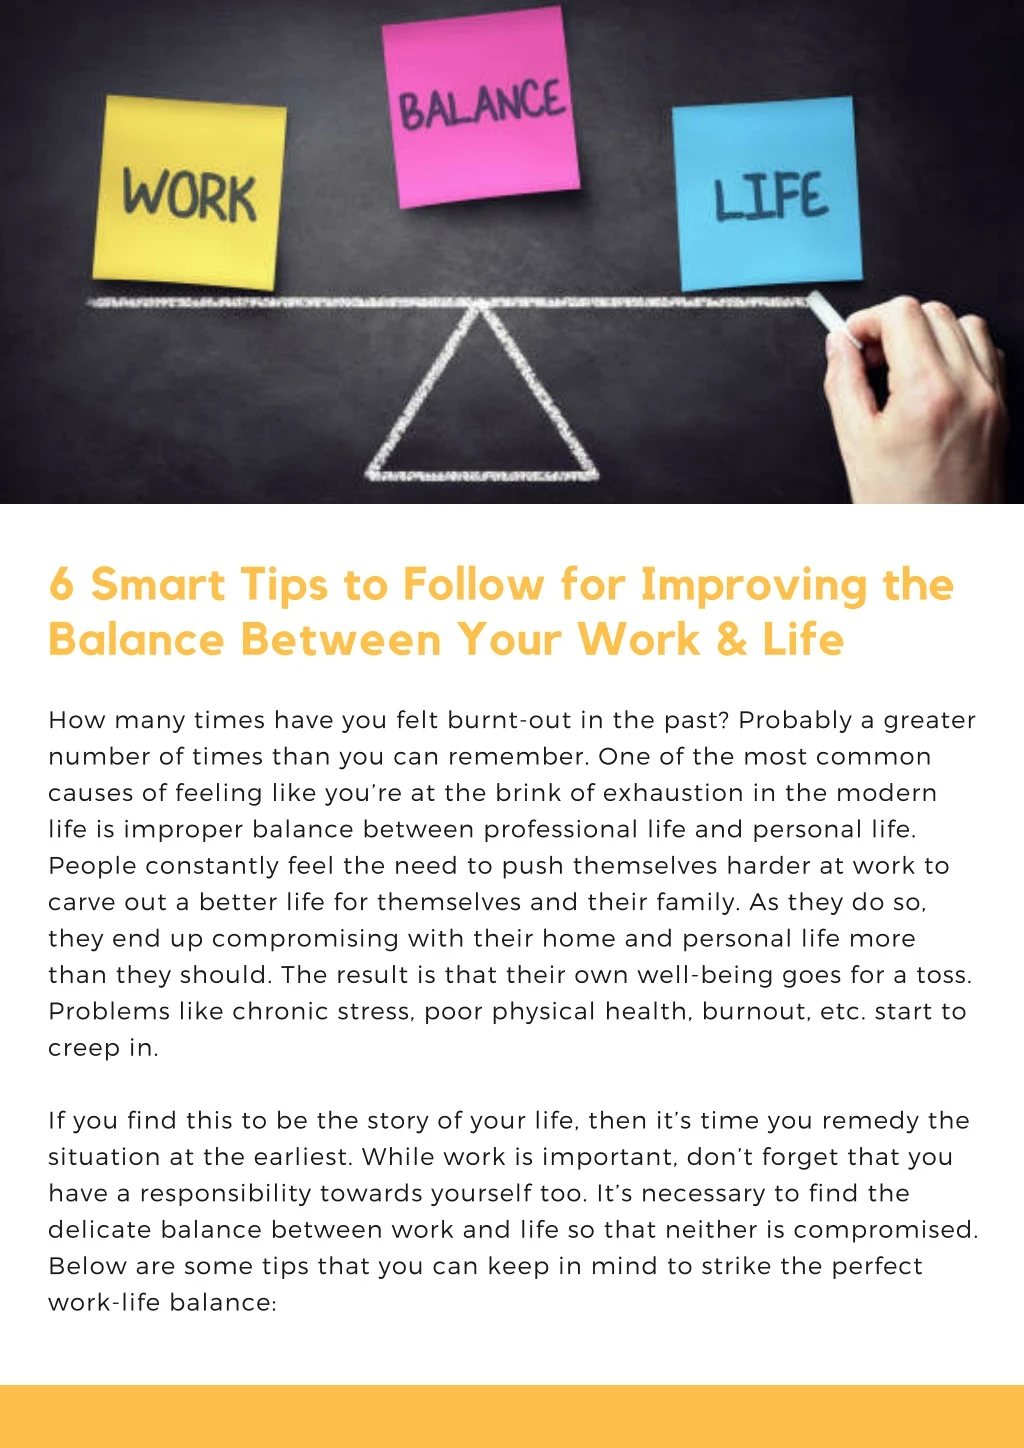 6 smart tips to follow for improving the balance